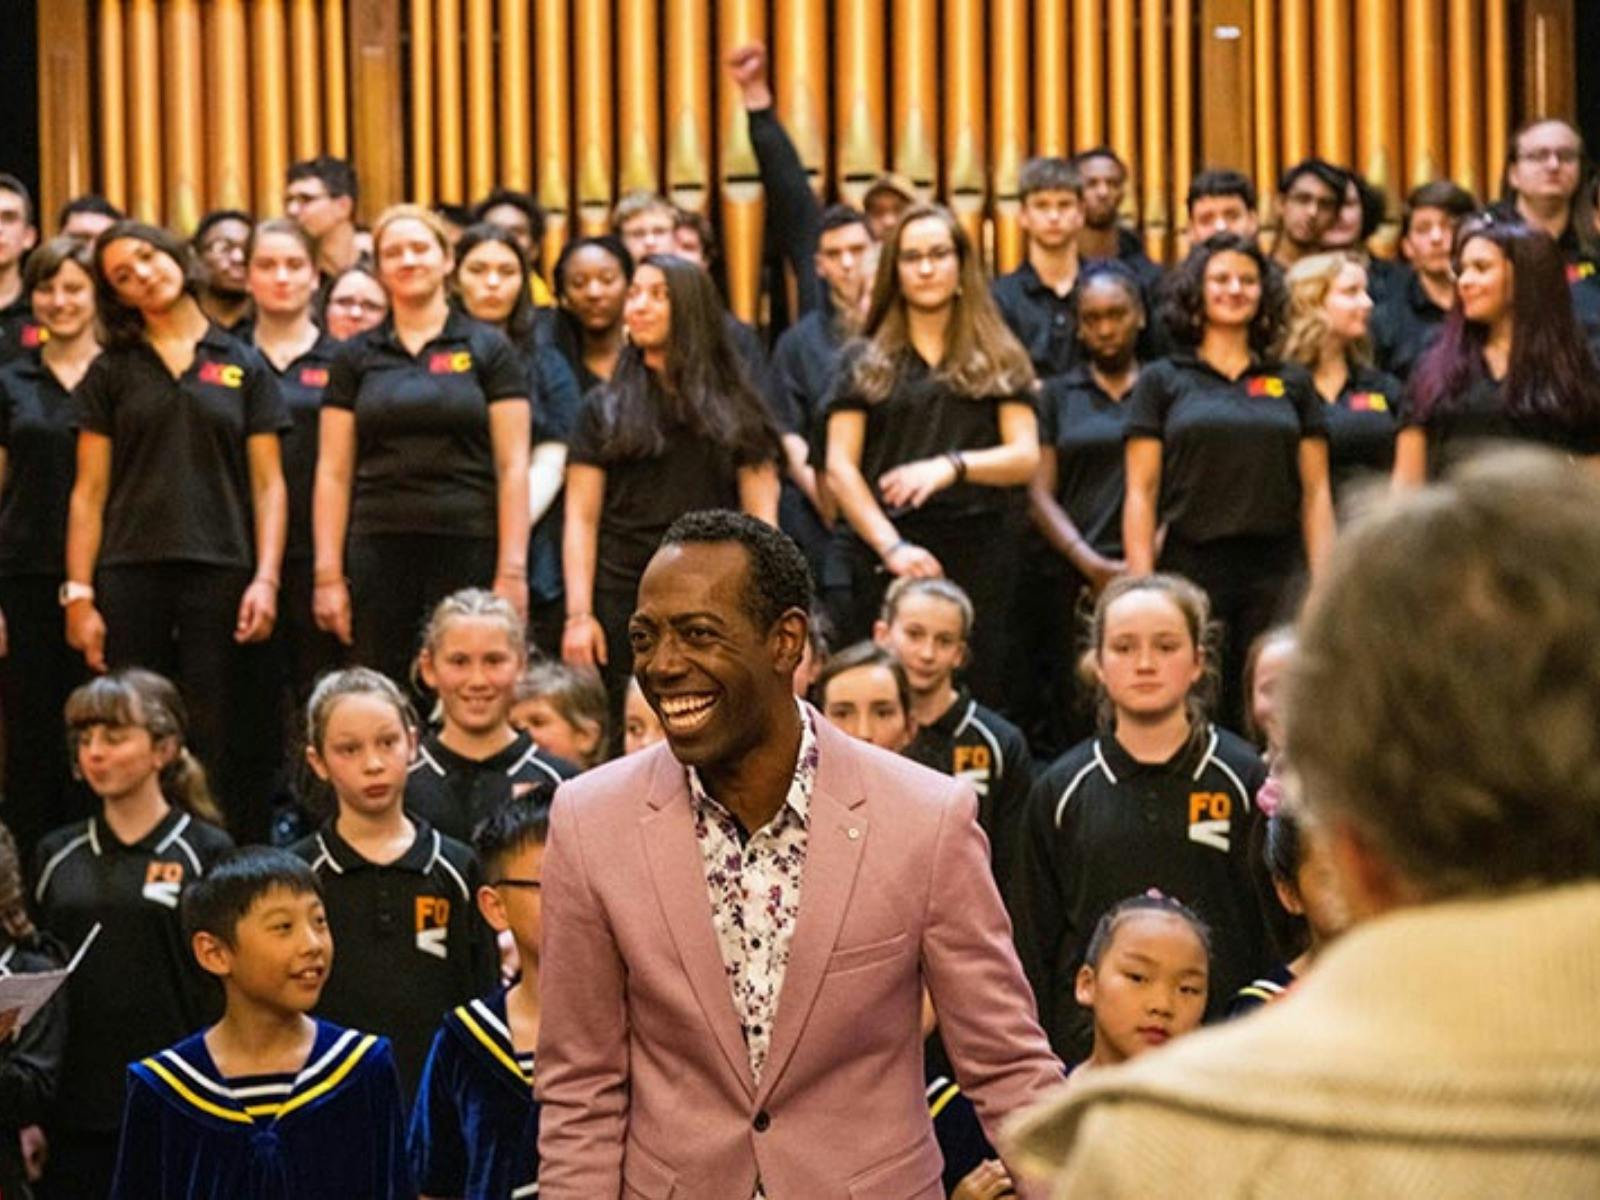 man in pink jacket smiling with choir in background